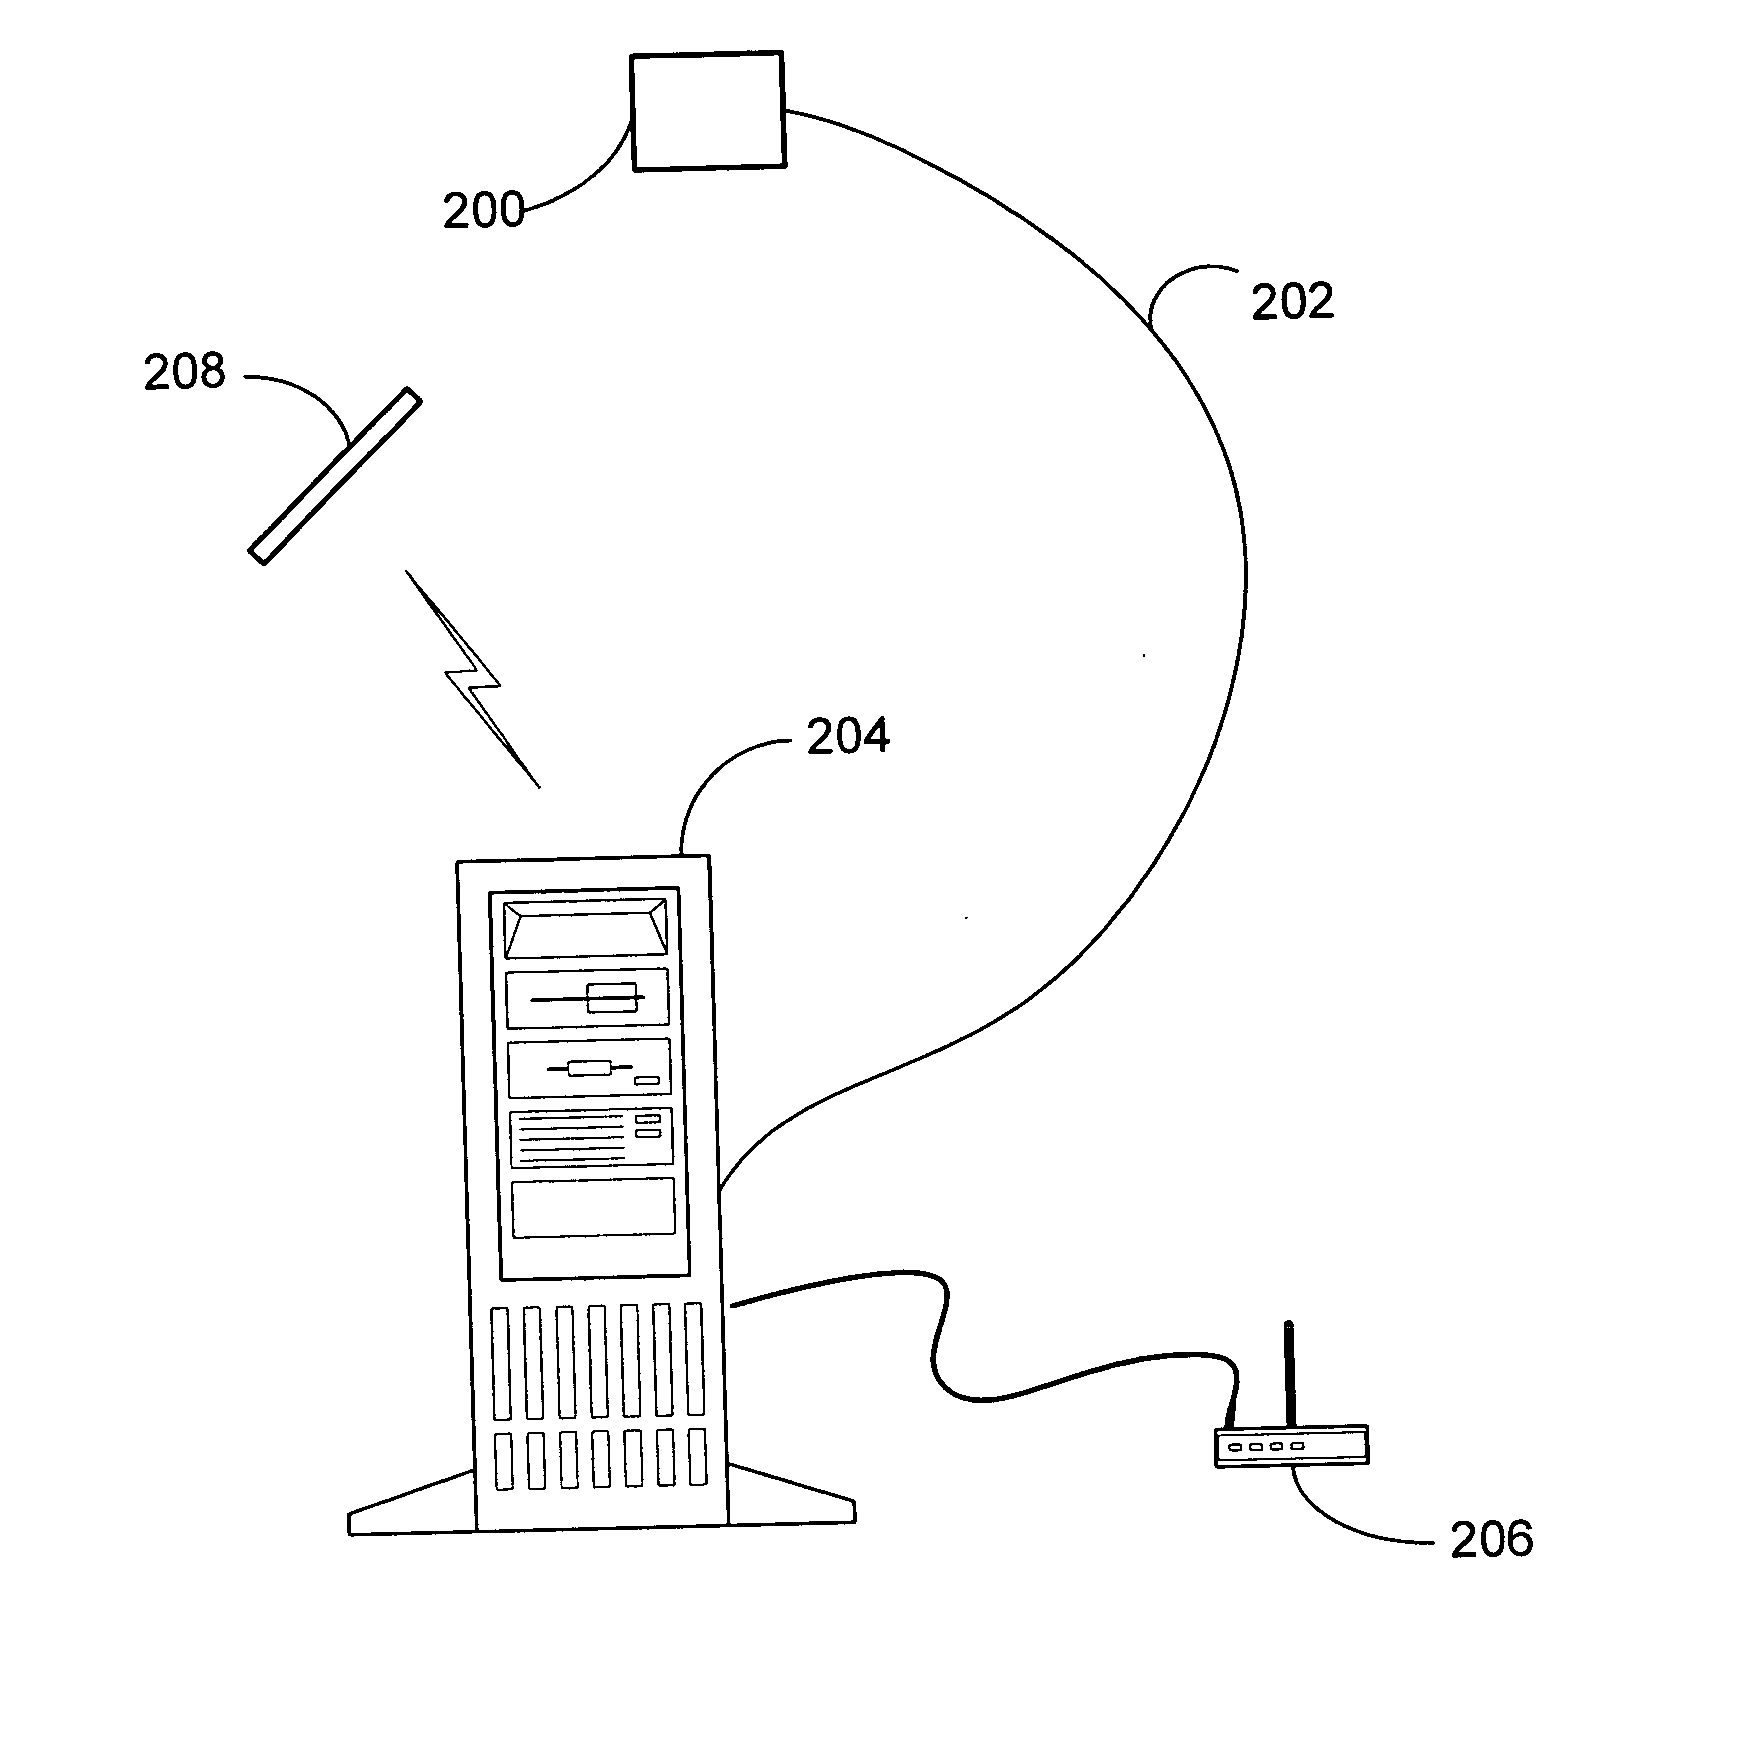 Pointing device and cursor for use in intelligent computing environments